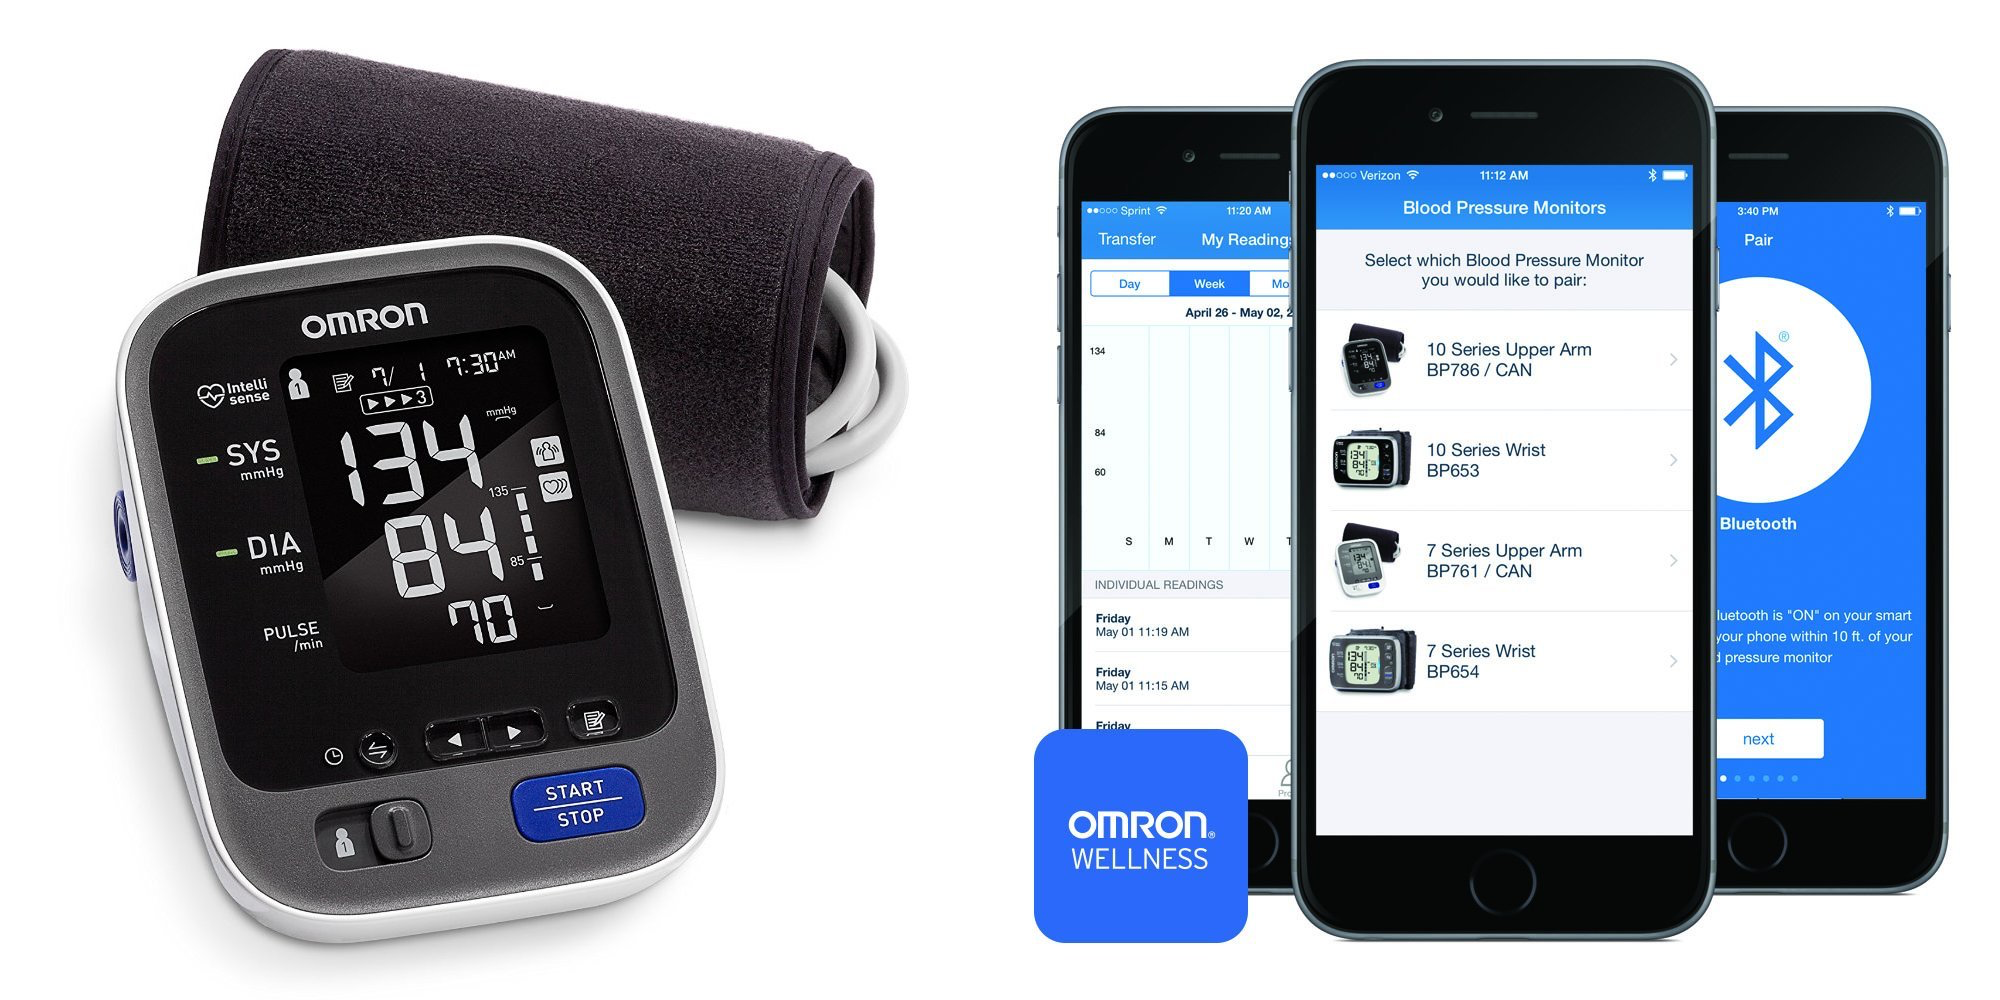 Omron 7 Series Blood Pressure Monitor with Bluetooth Smart Connectivity